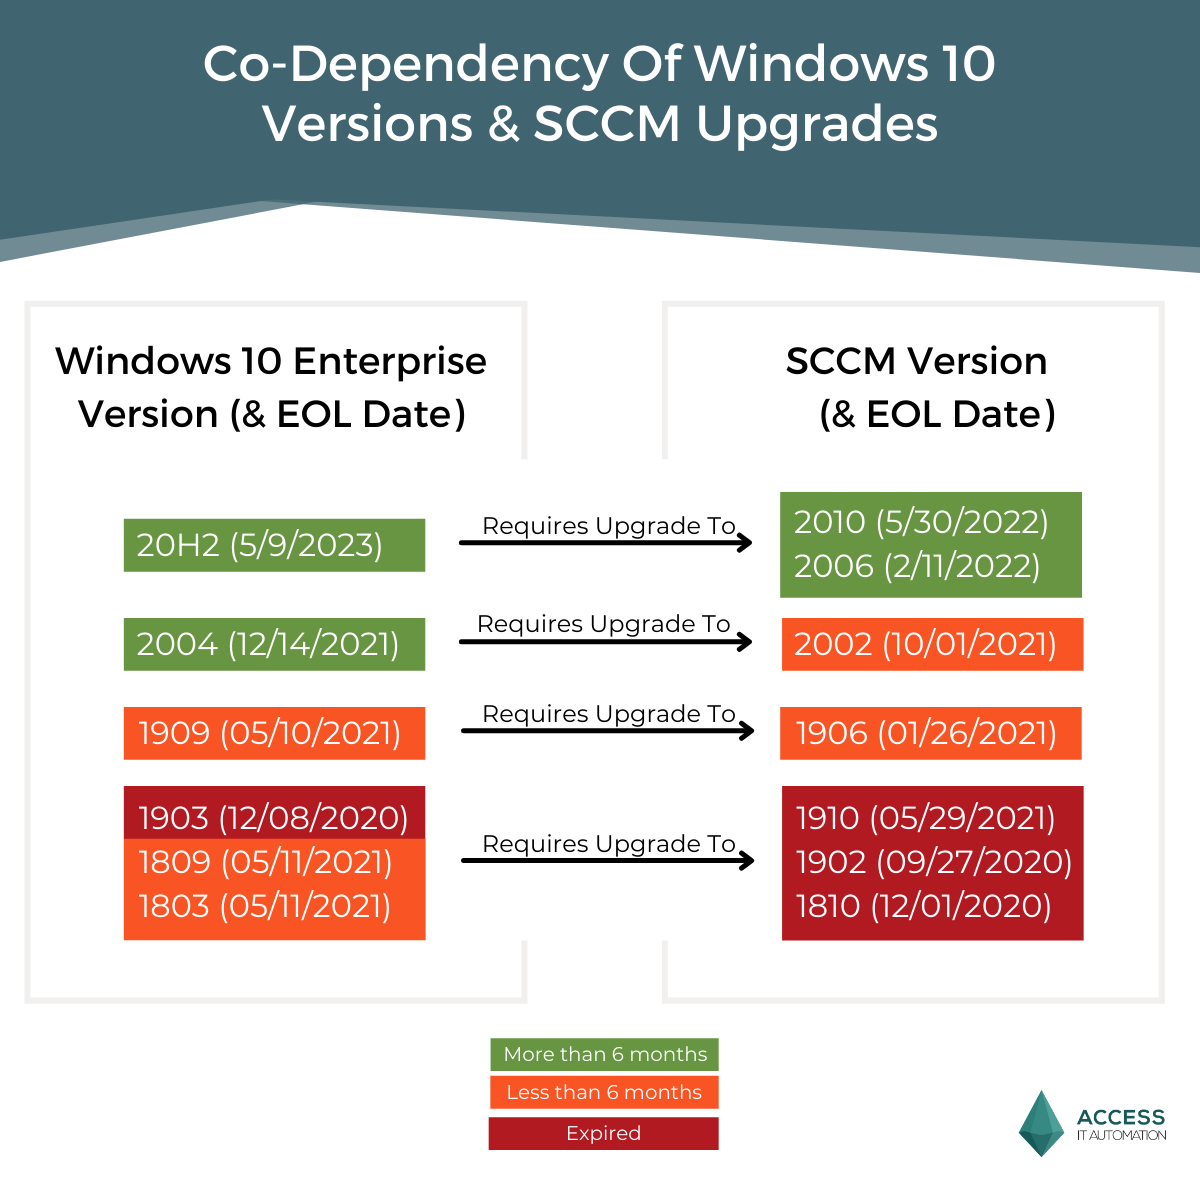 Co-Dependency Of Windows 10 Versions & SCCM Upgrades